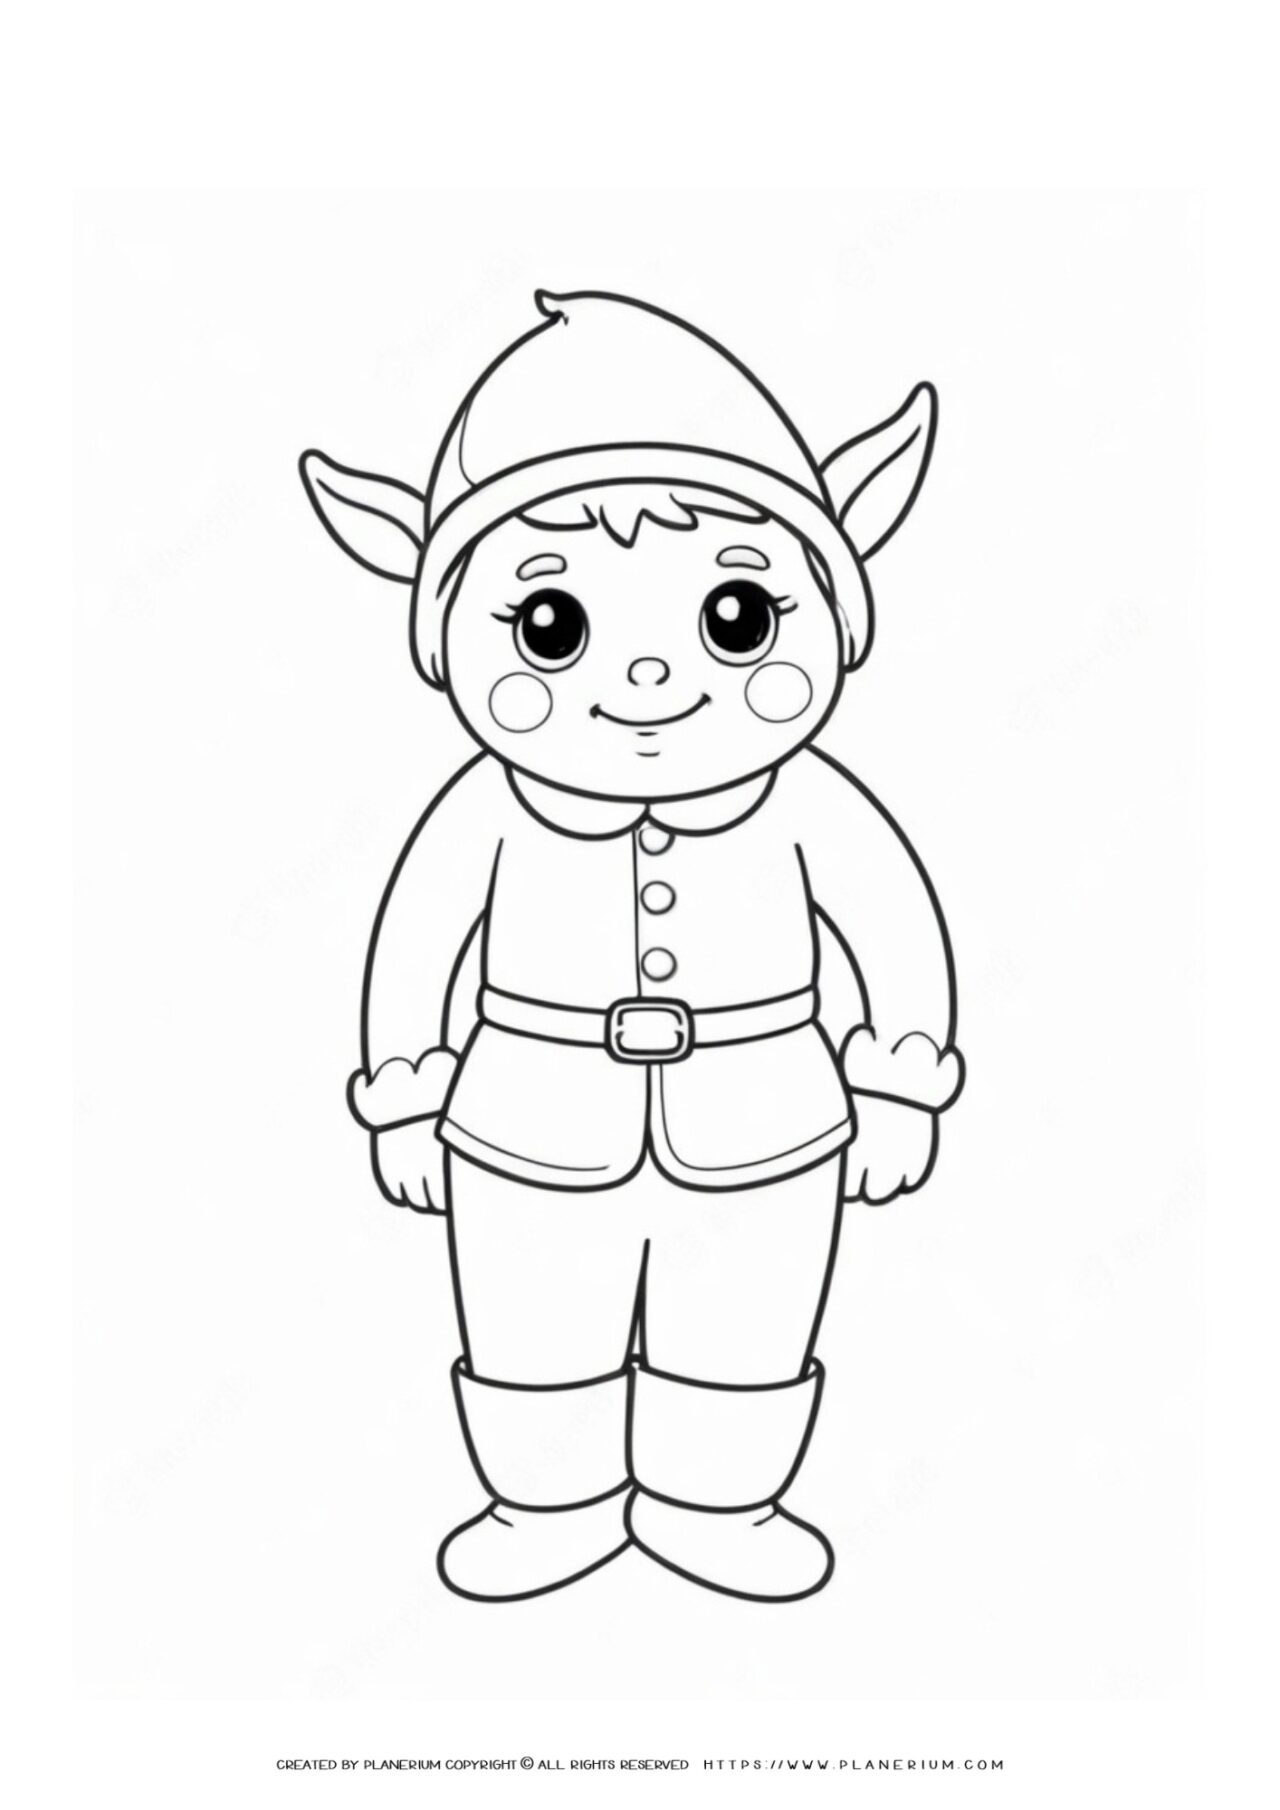 Cartoon elf coloring page for kids.